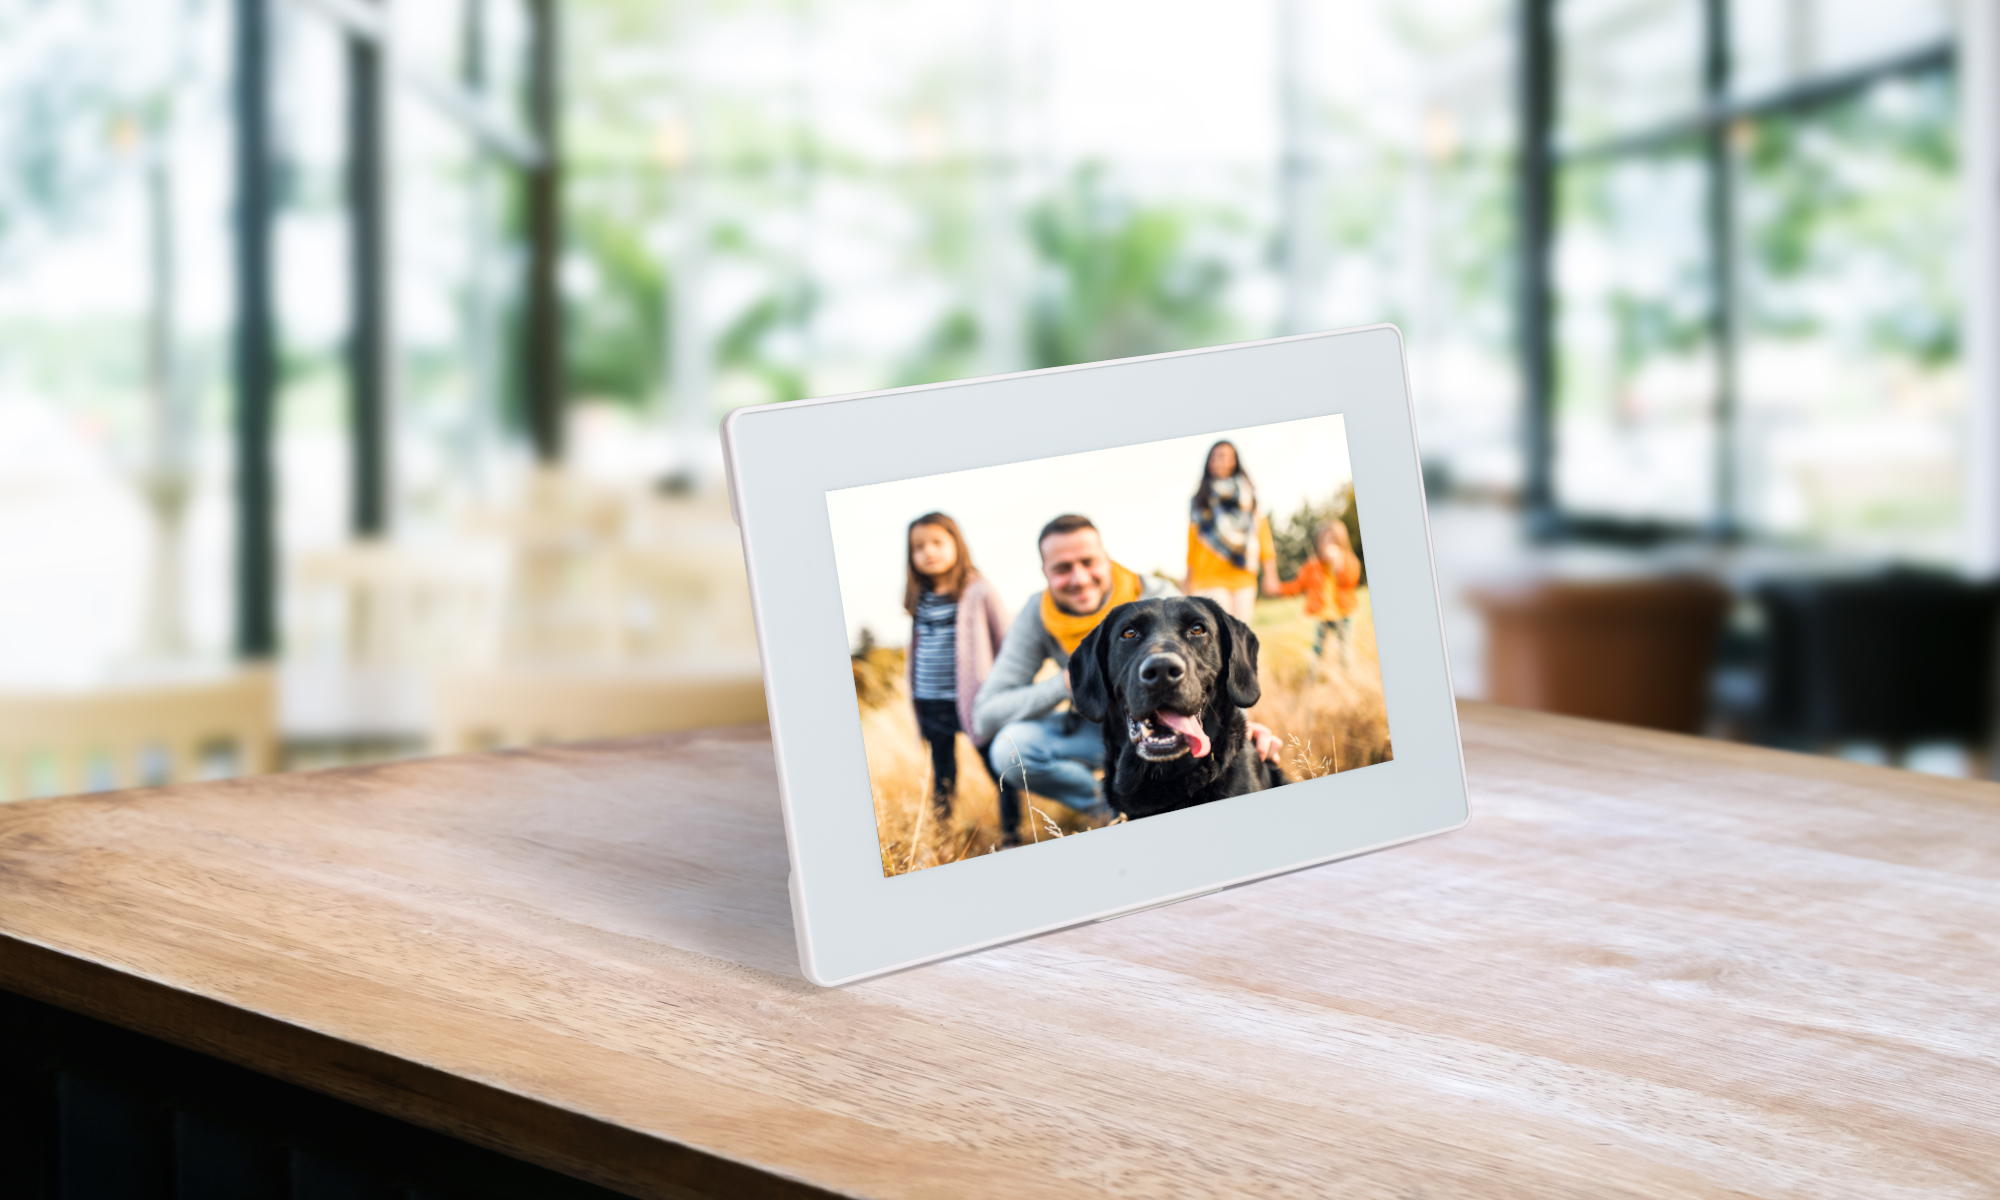 A digital frame without a frame moulding with a picture of a family and a dog